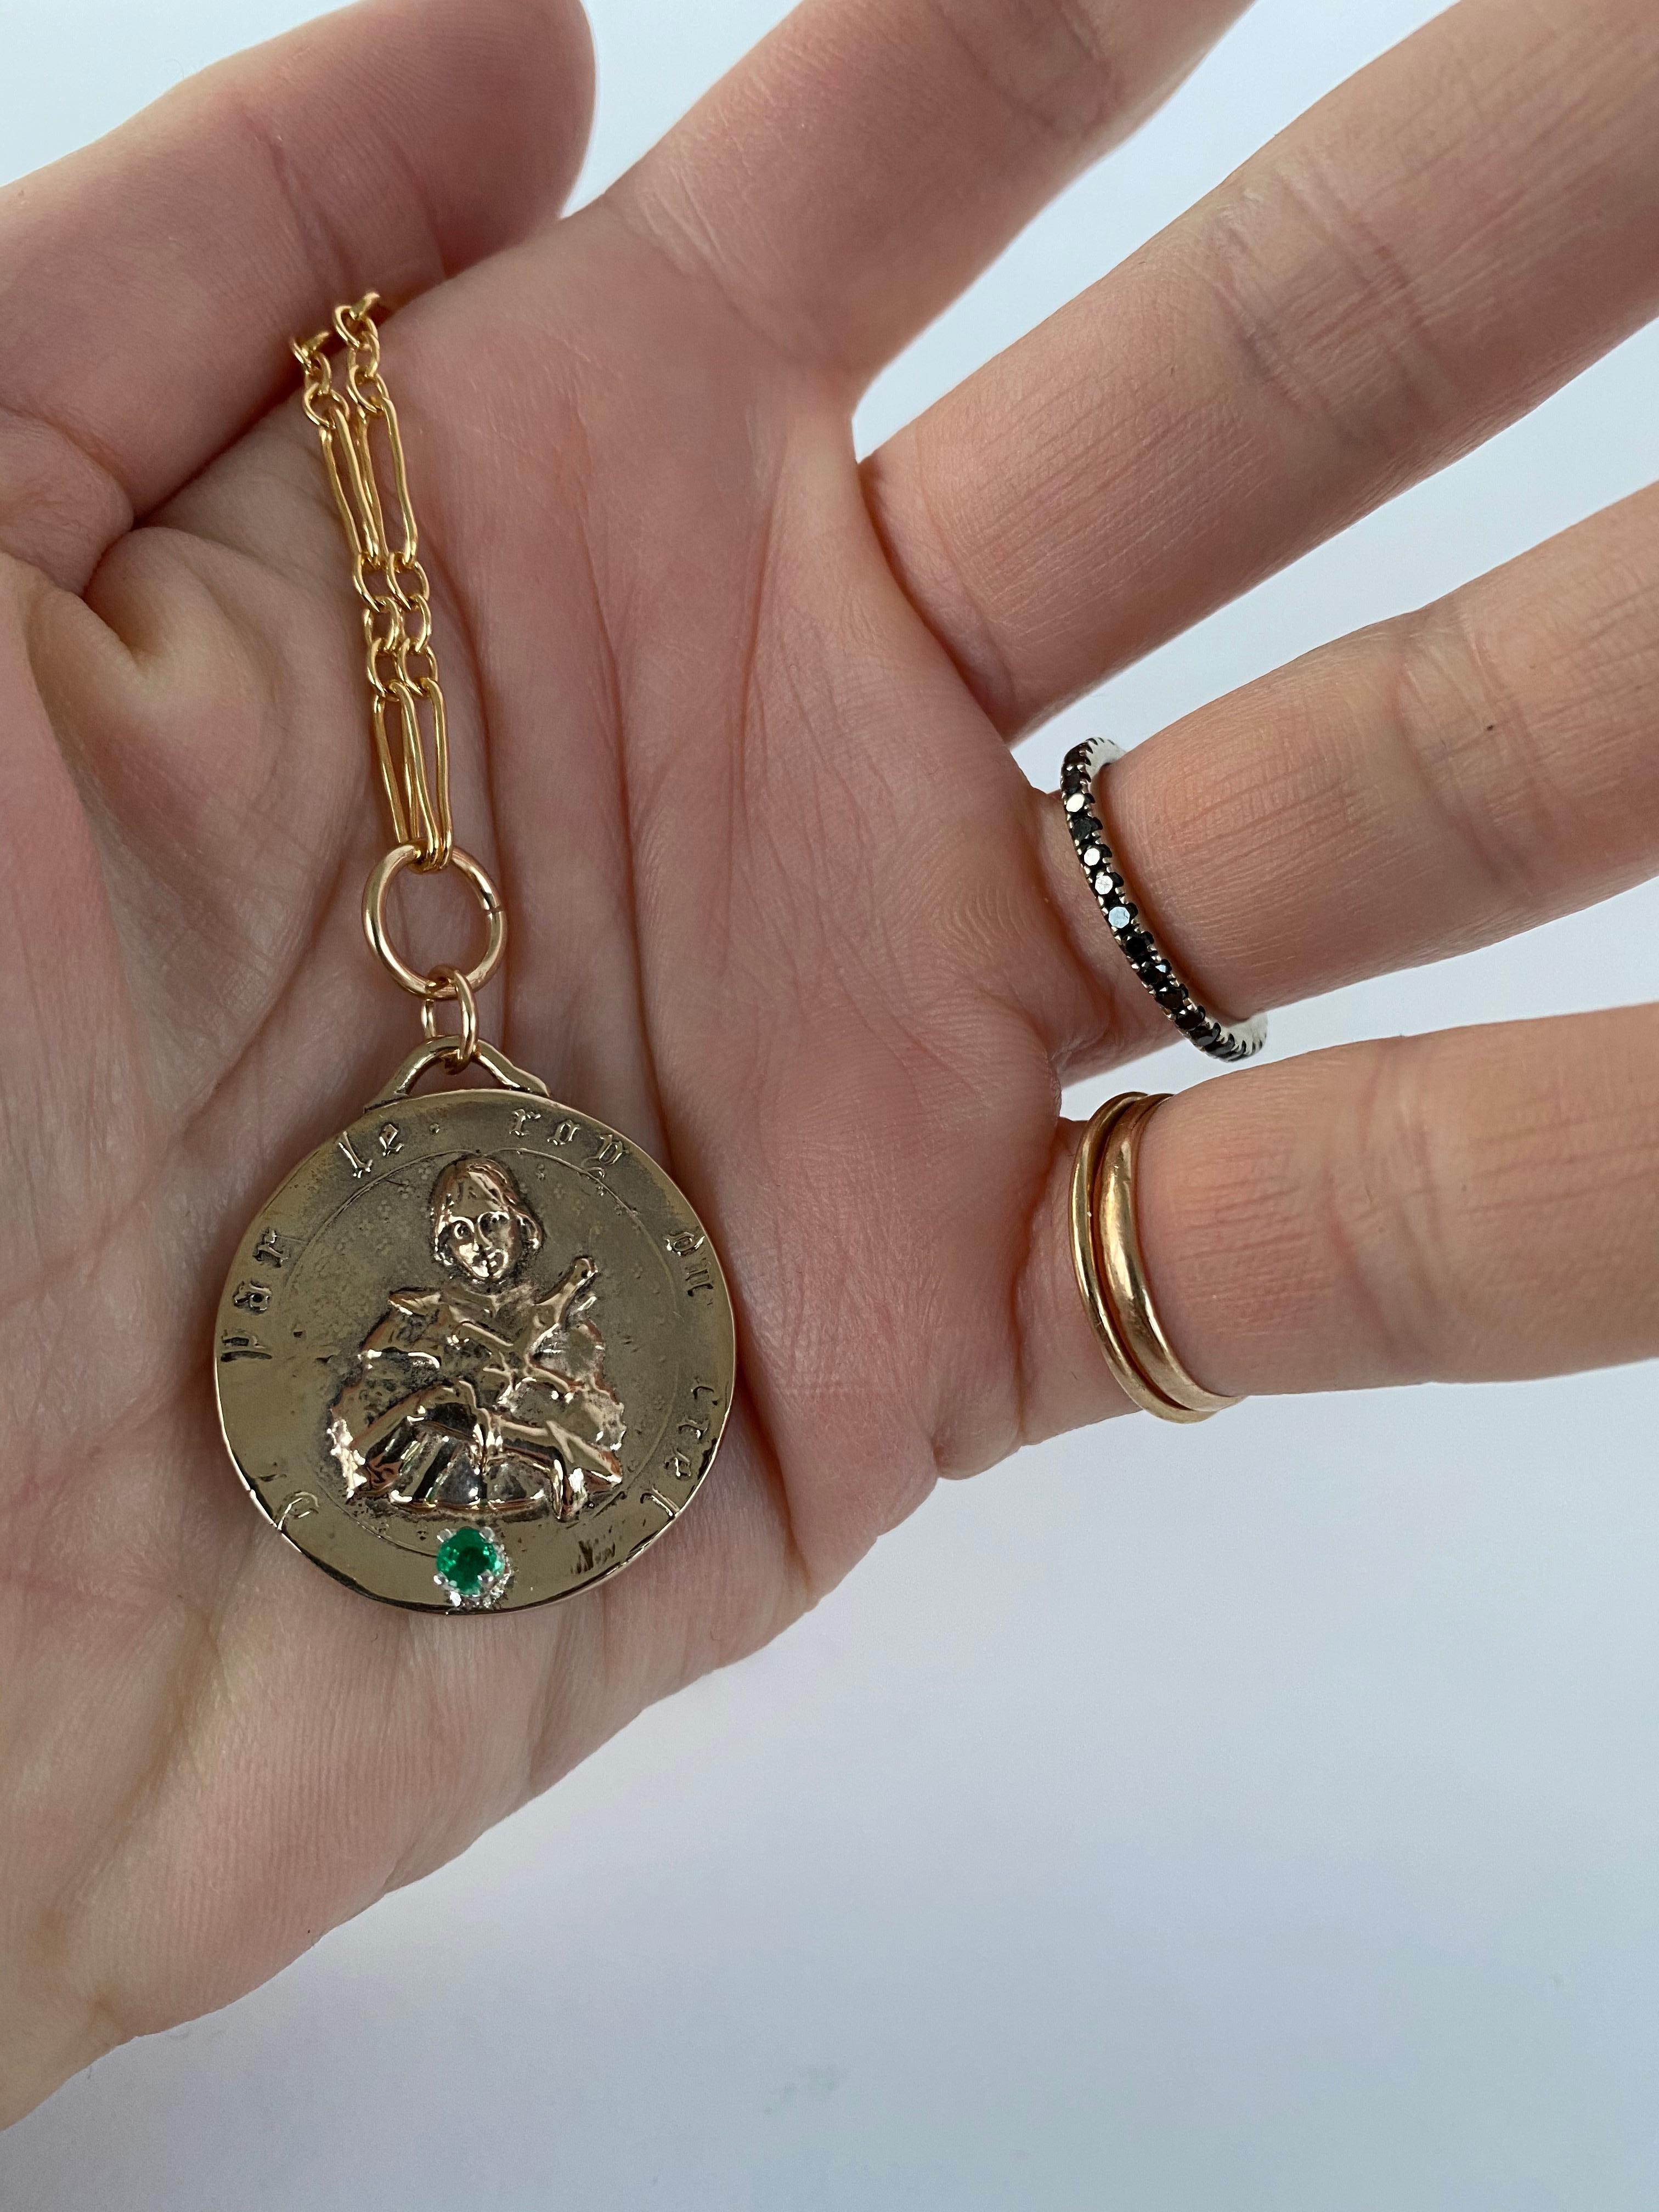 Emerald Set on a Medal Pendant of Joan of Arc, the chunky chain necklace is gold filled J Dauphin

Exclusive piece with Joan of Arc Medal Round Coin pendant in Bronze with an Emerald and a gold filled Chain. Necklace is 24